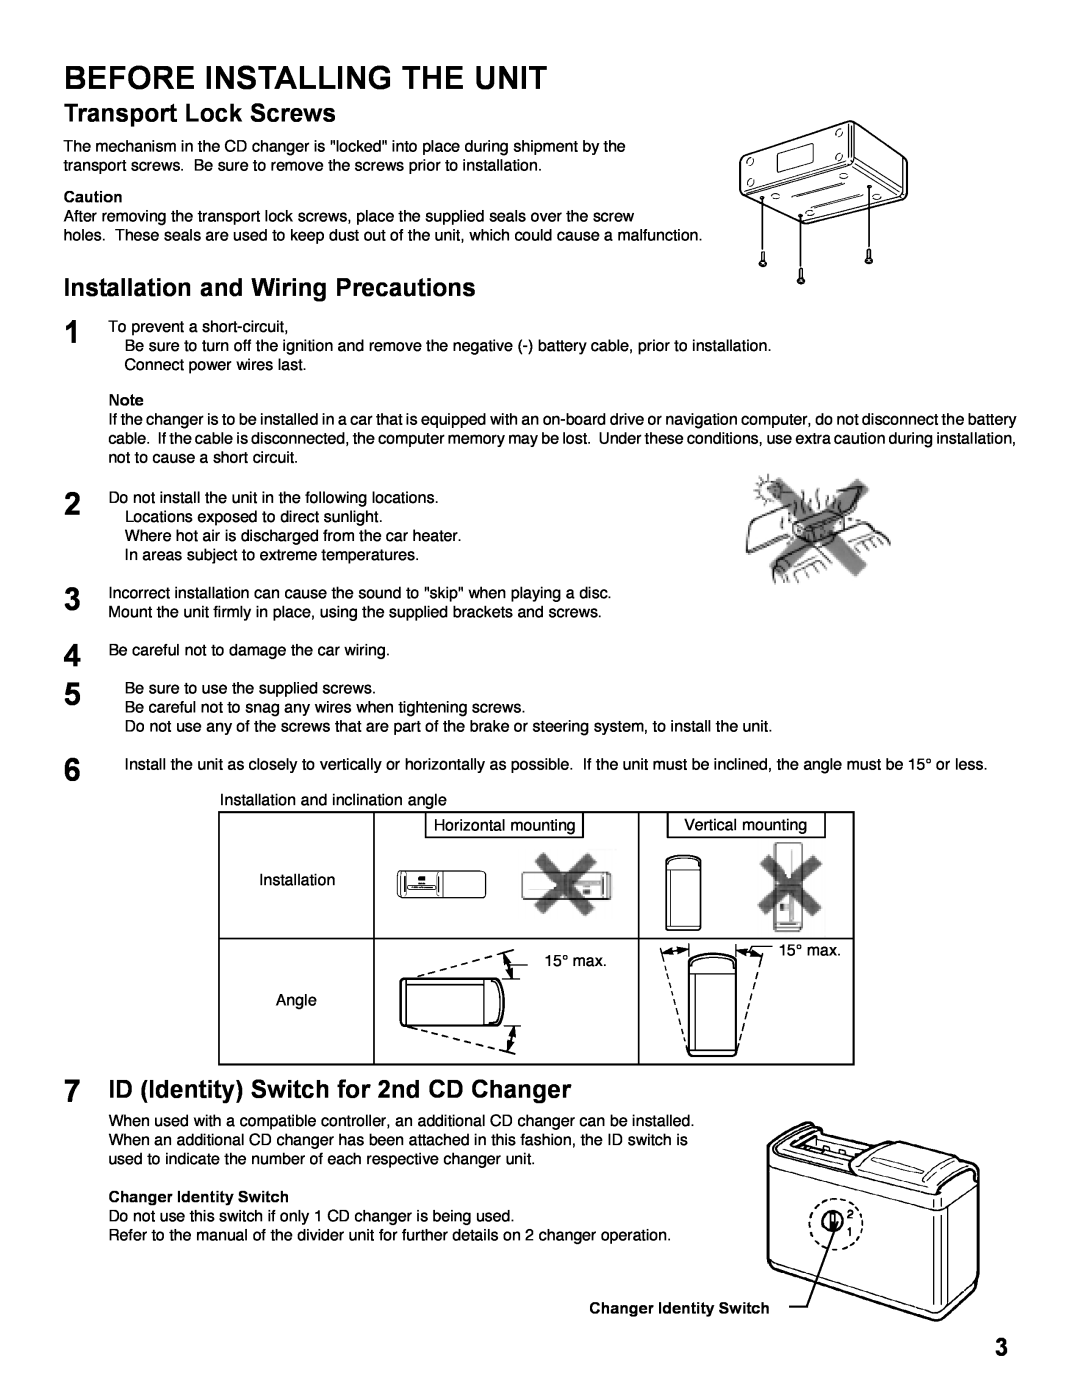 Shopsmith none Transport Lock Screws, Installation and Wiring Precautions, 7ID Identity Switch for 2nd CD Changer 